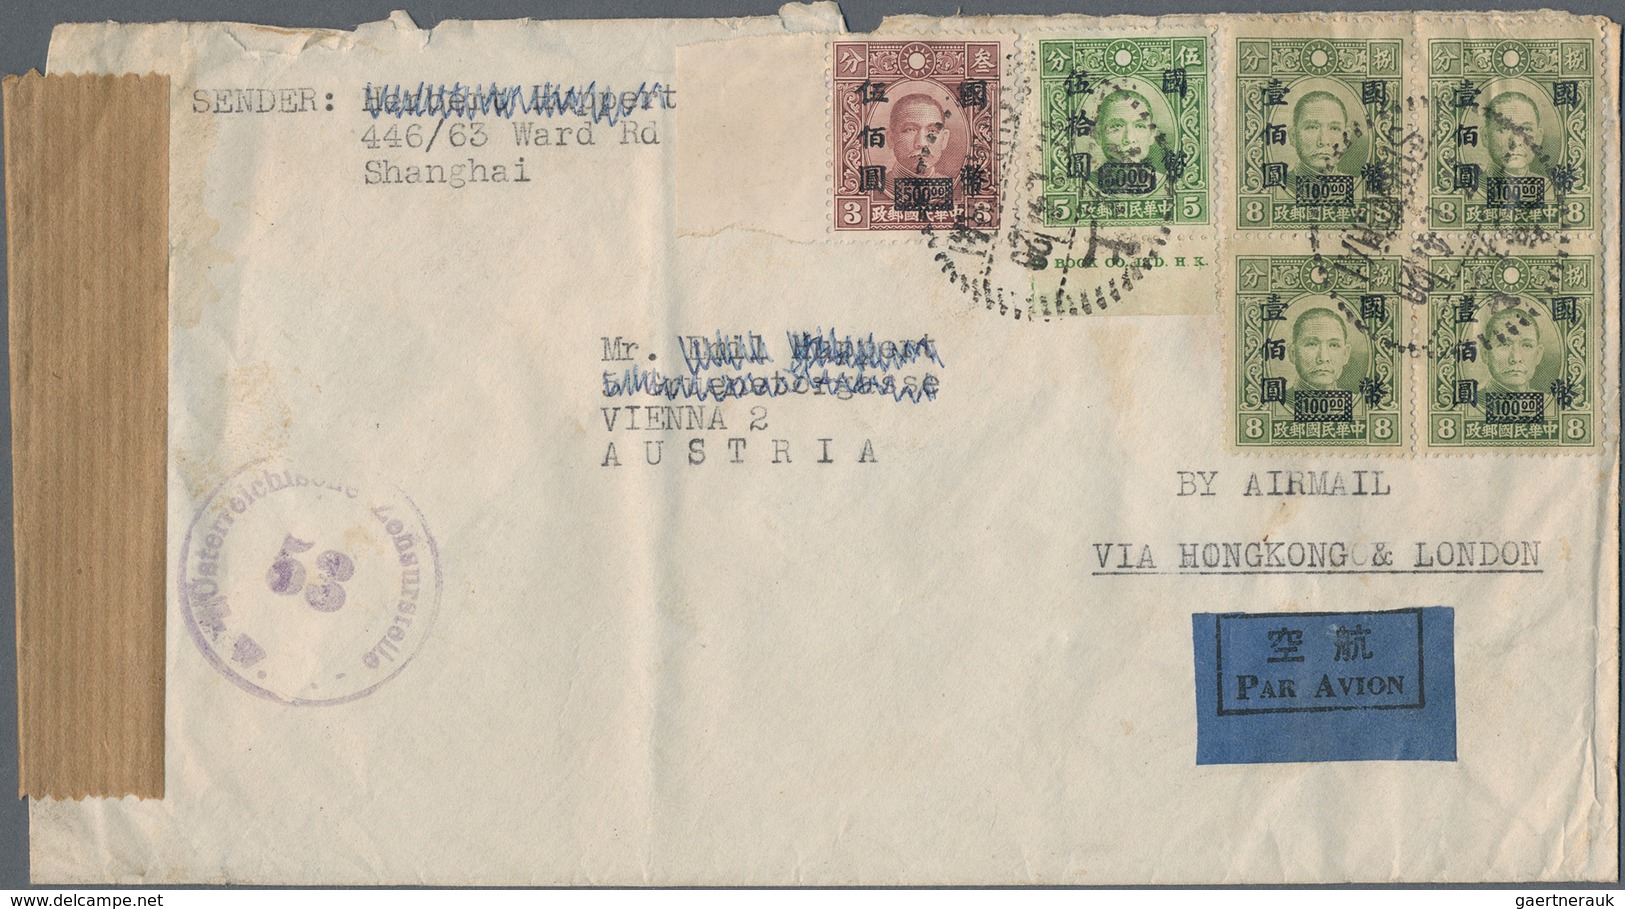 China: 1945/47, covers (9 inc. two surface) used to foreign, mostly Austria but also UK, Australia,